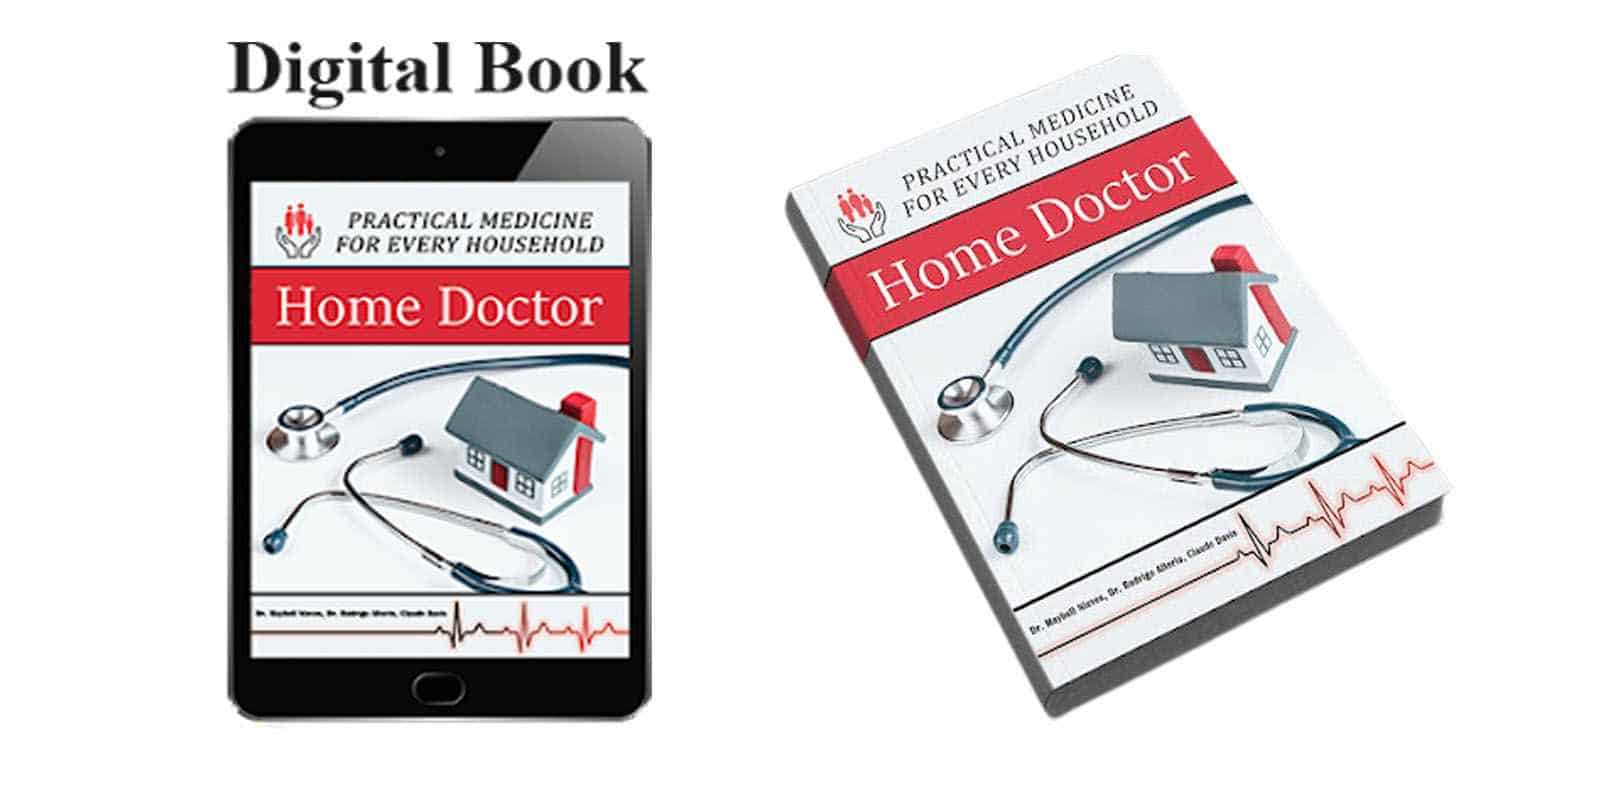 The Home Doctor Guide- Digital book